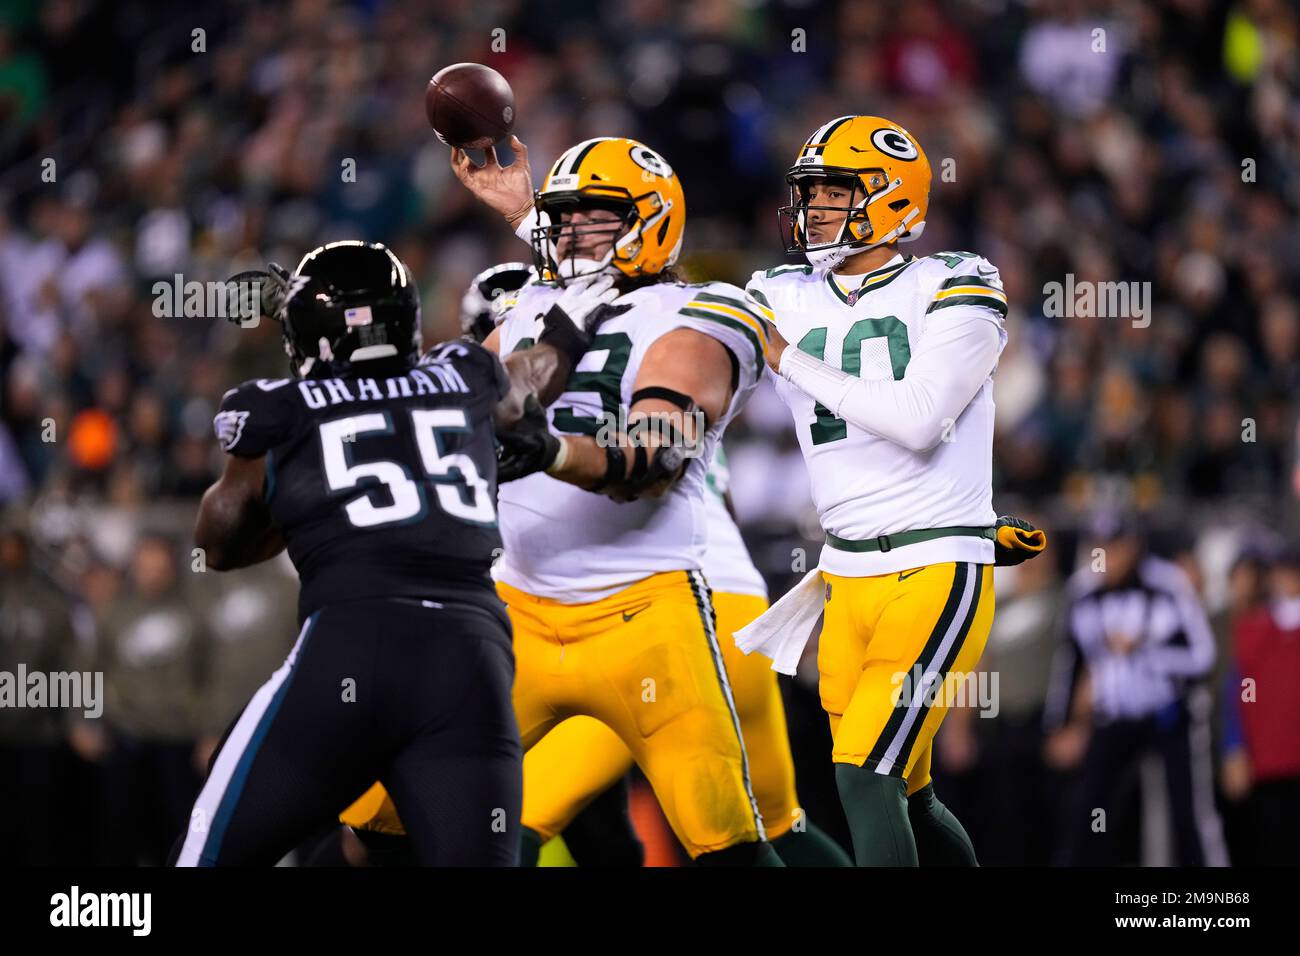 Green Bay Packers quarterback Jordan Love in action during an NFL